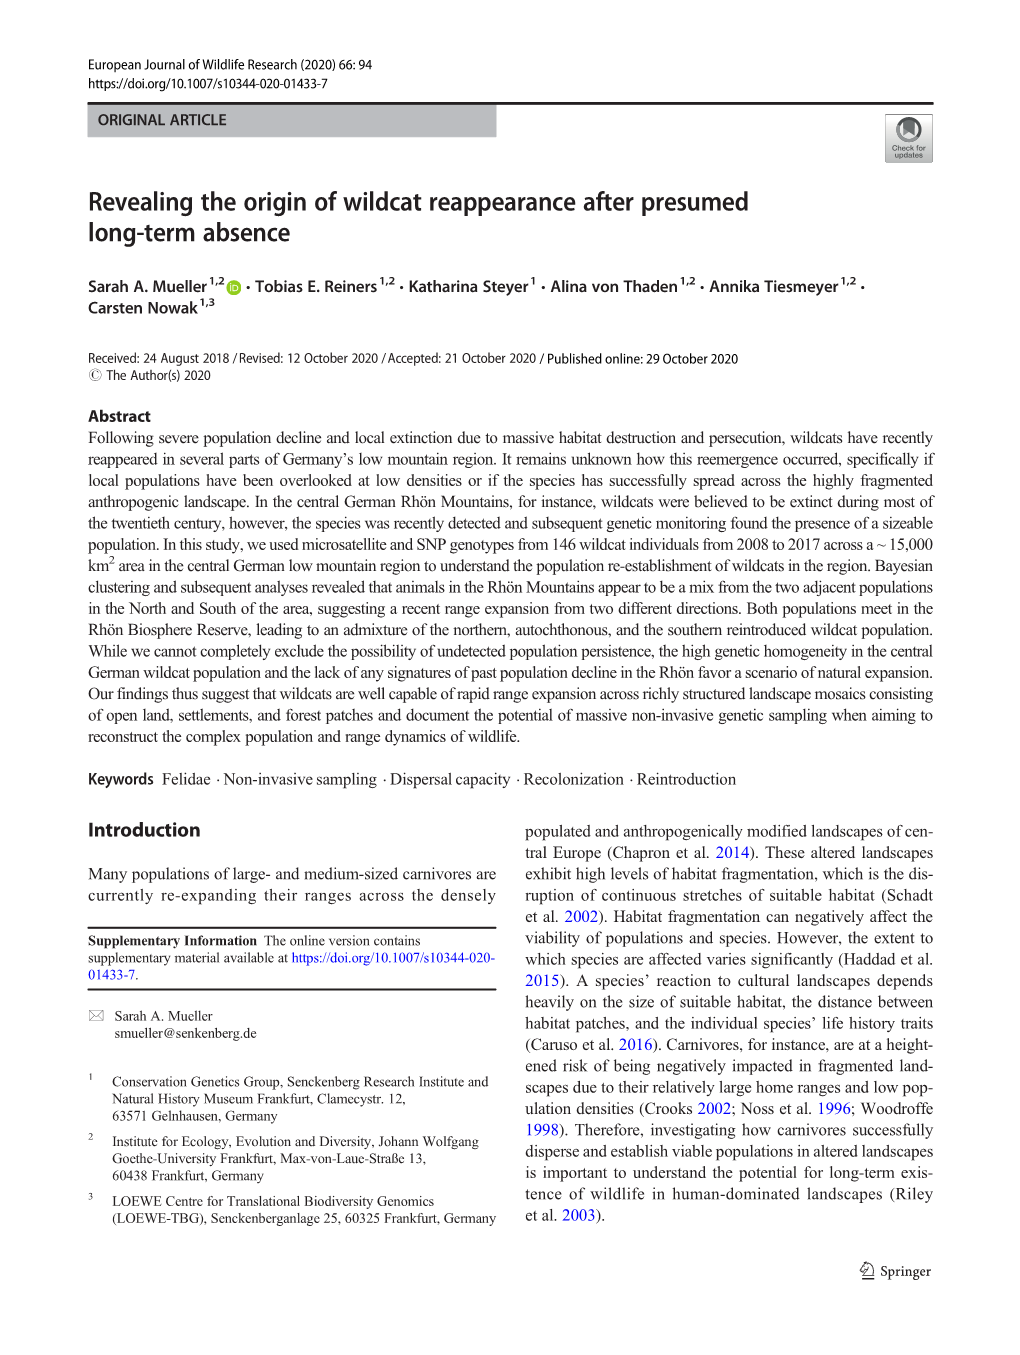 Revealing the Origin of Wildcat Reappearance After Presumed Long-Term Absence